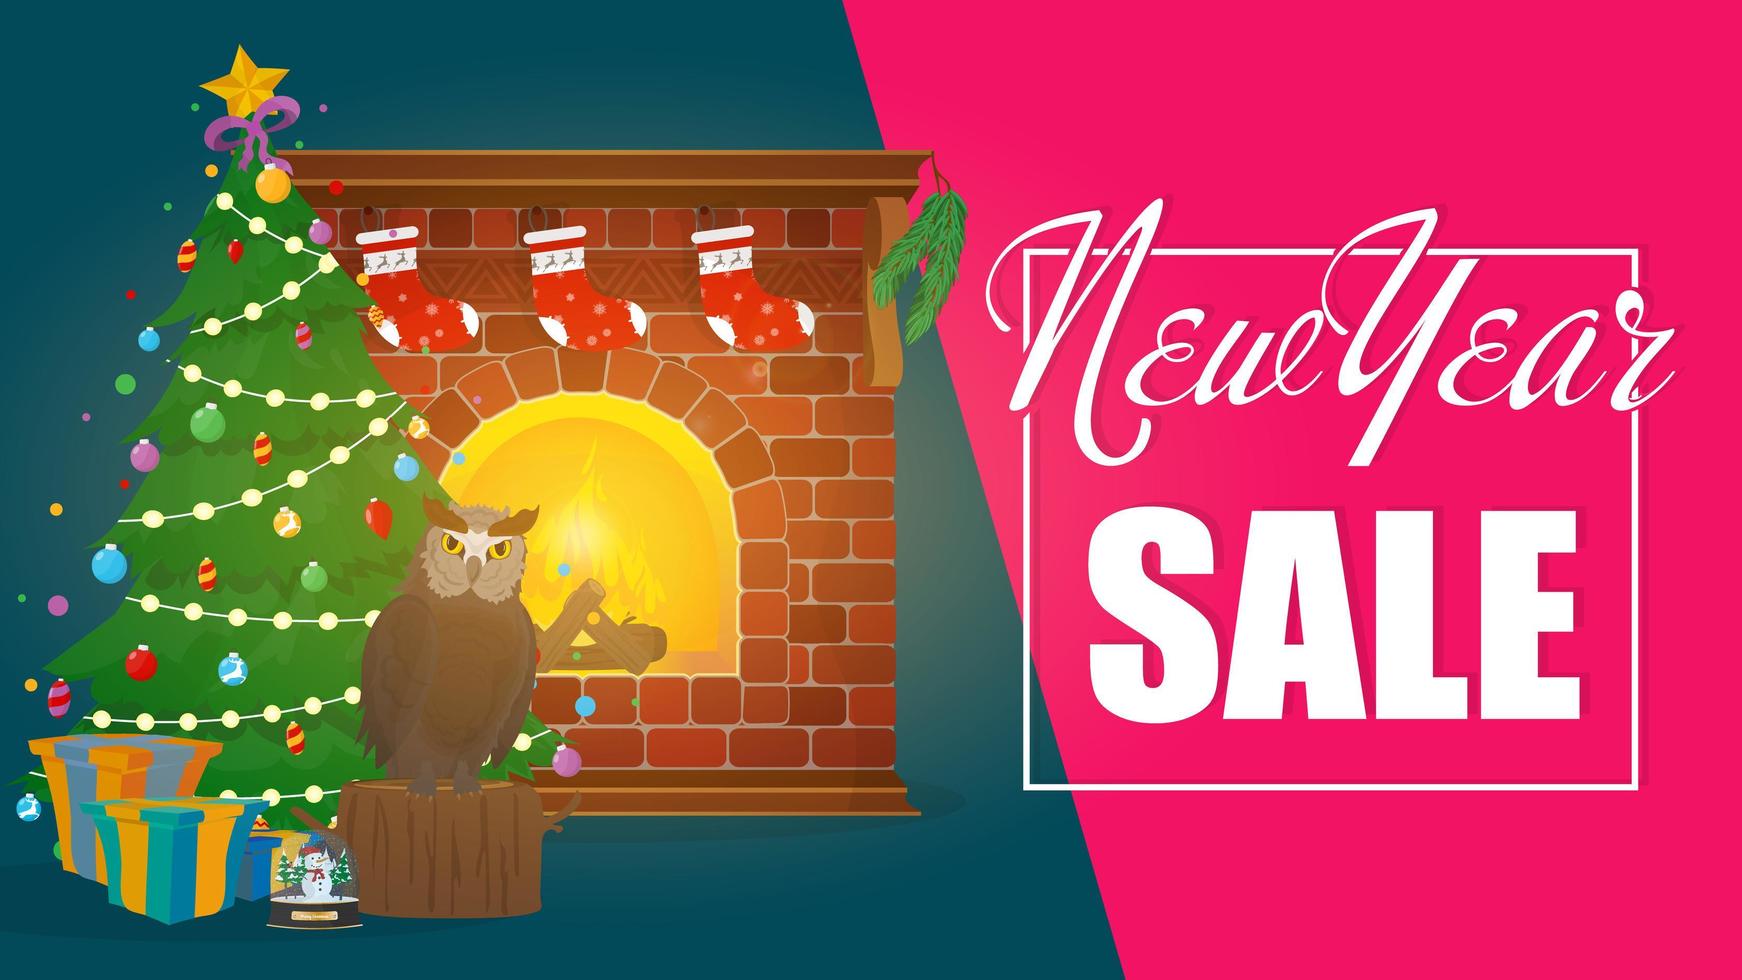 New year sale banner. Gifts, Christmas tree, fireplace. Poster on the topic of discounts for the new year. Vector. vector